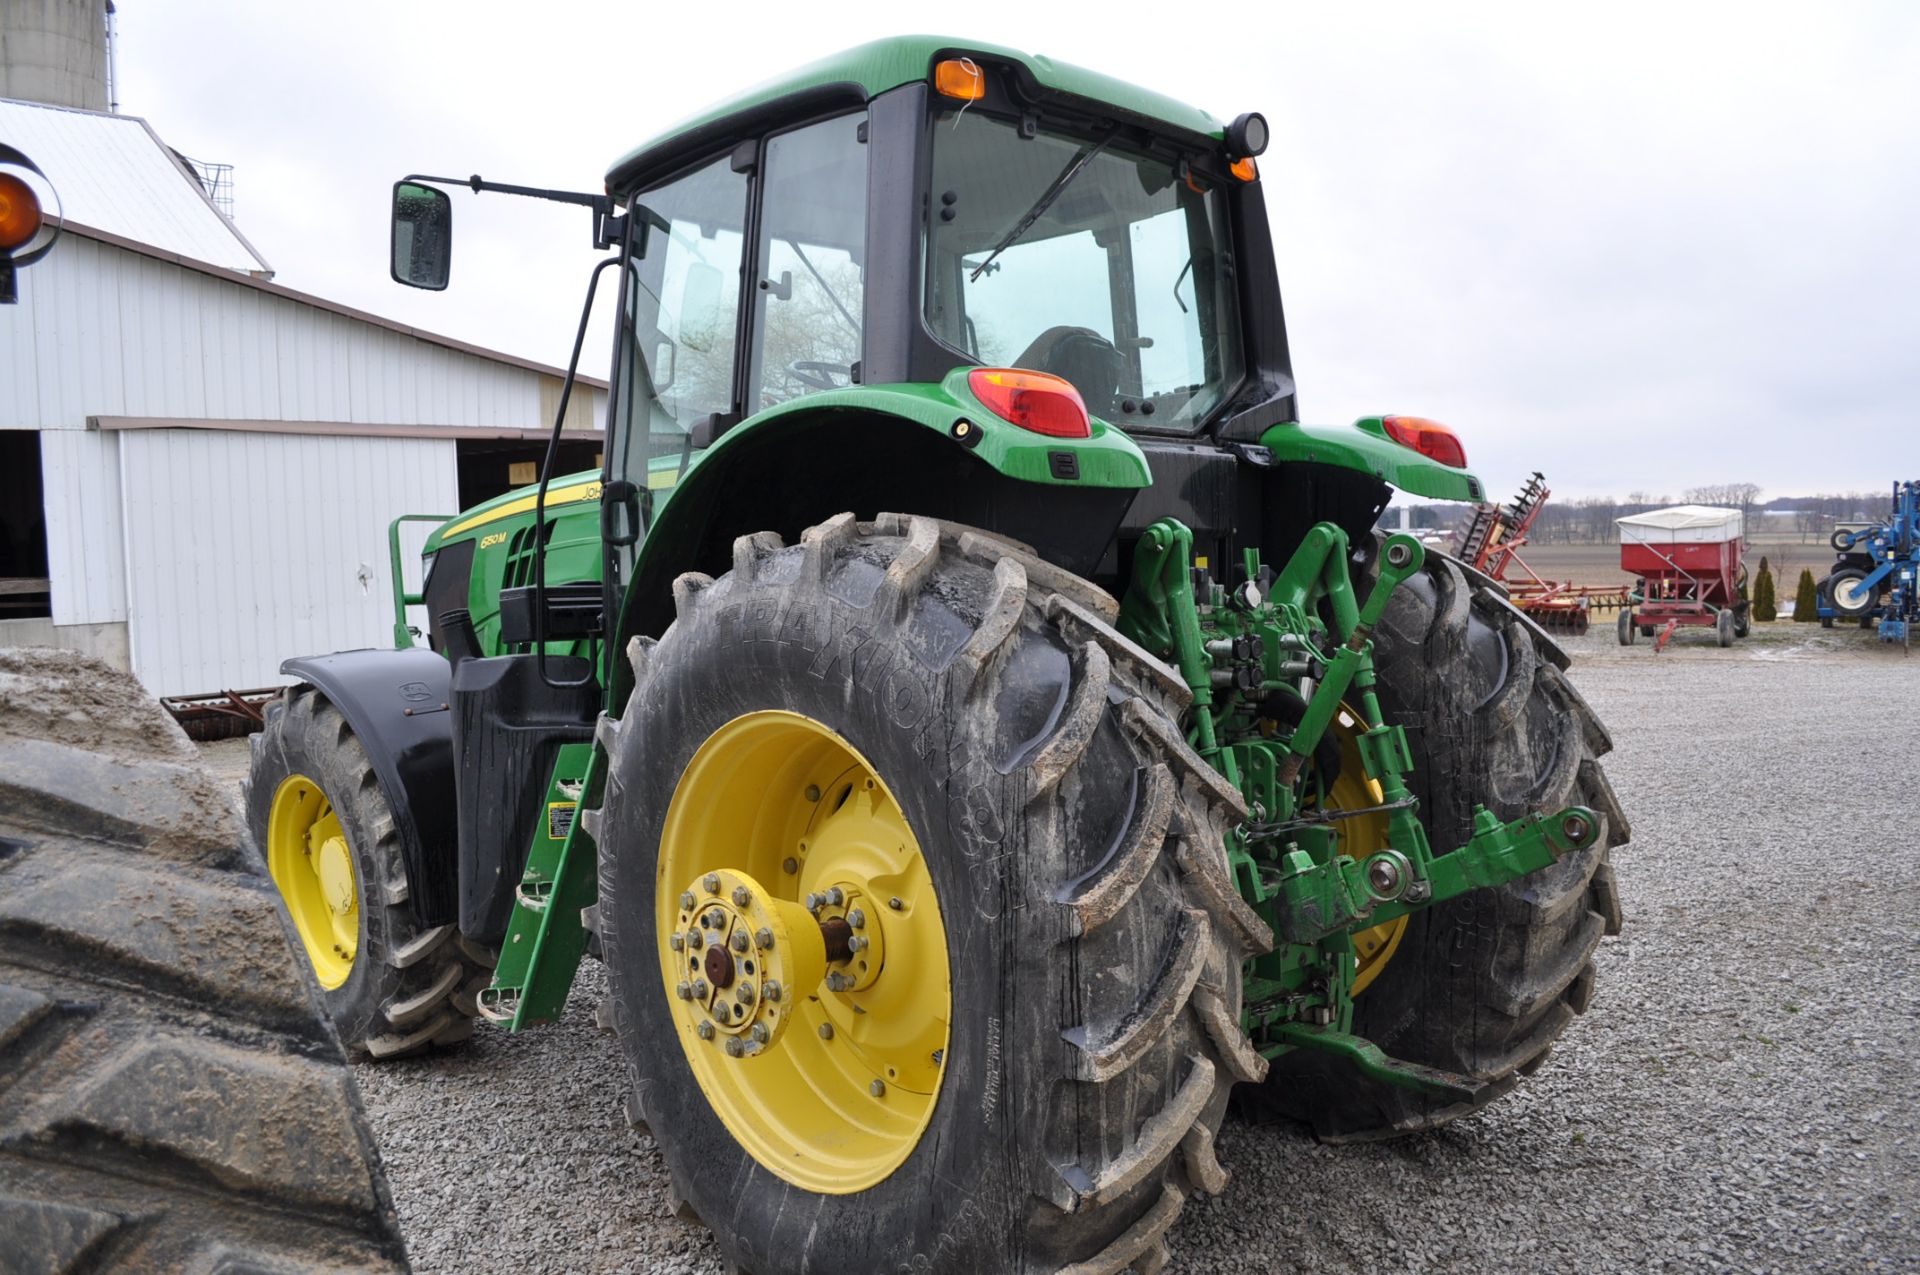 John Deere 6150M tractor, MFWD, C/H/A, 620/85 R 38 rear, 420/85 R 28 front, front fenders, - Image 4 of 20